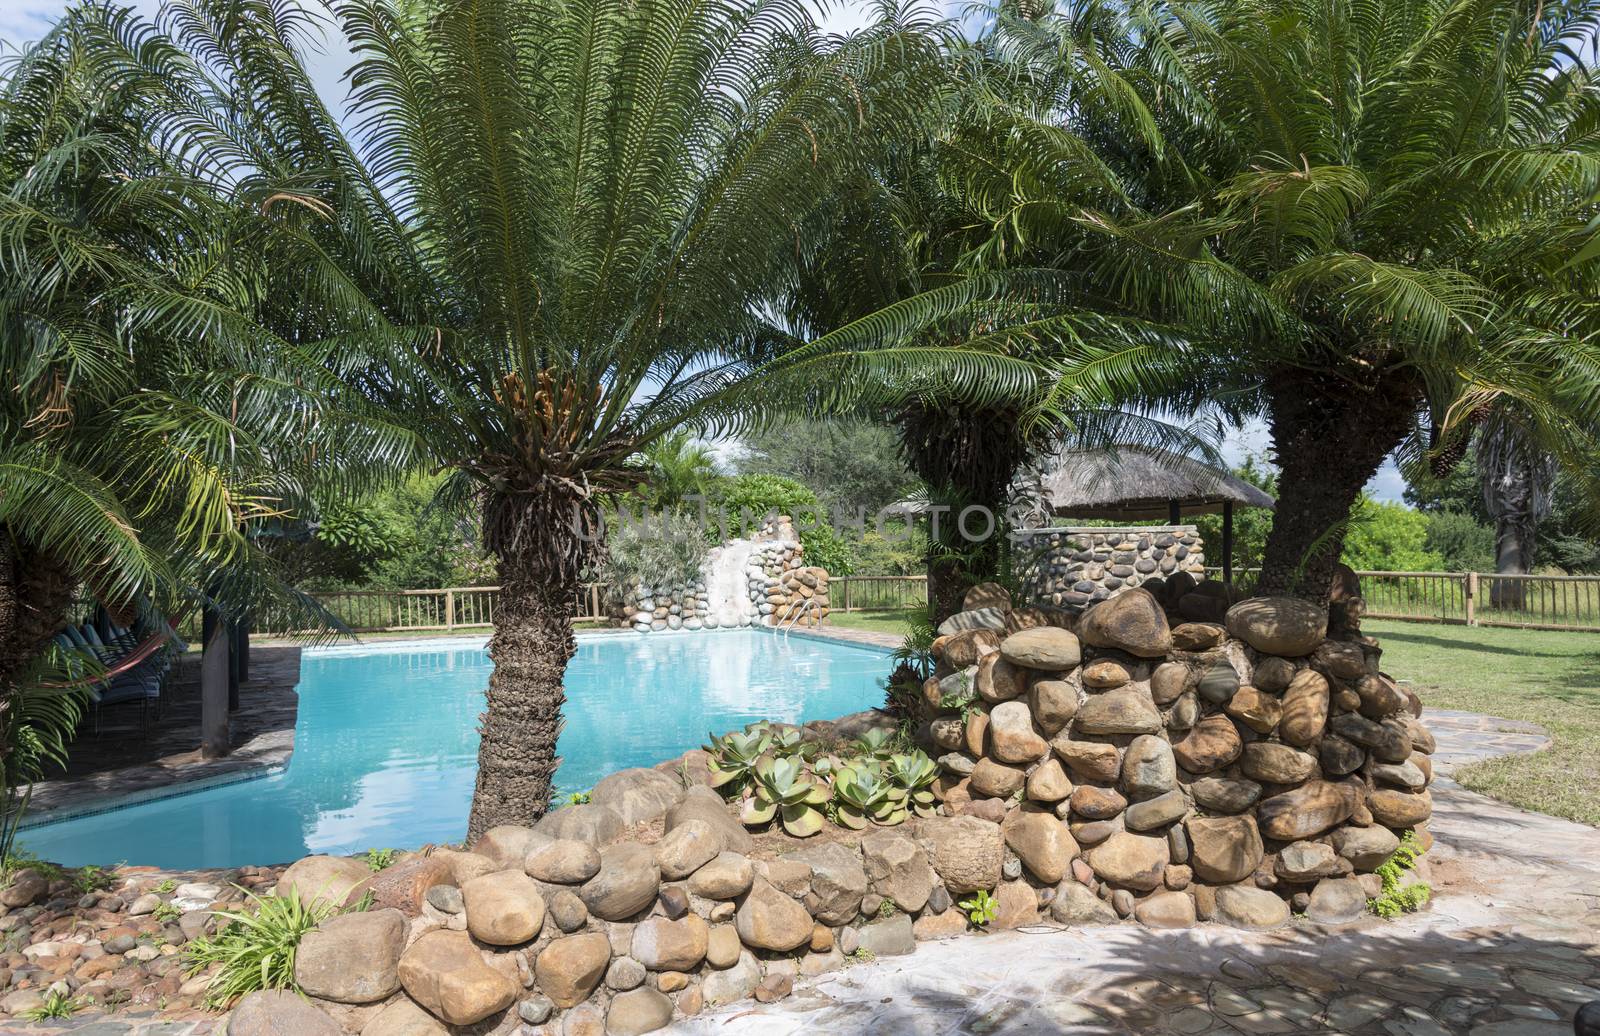 tropical swimming pool with palm trees by compuinfoto